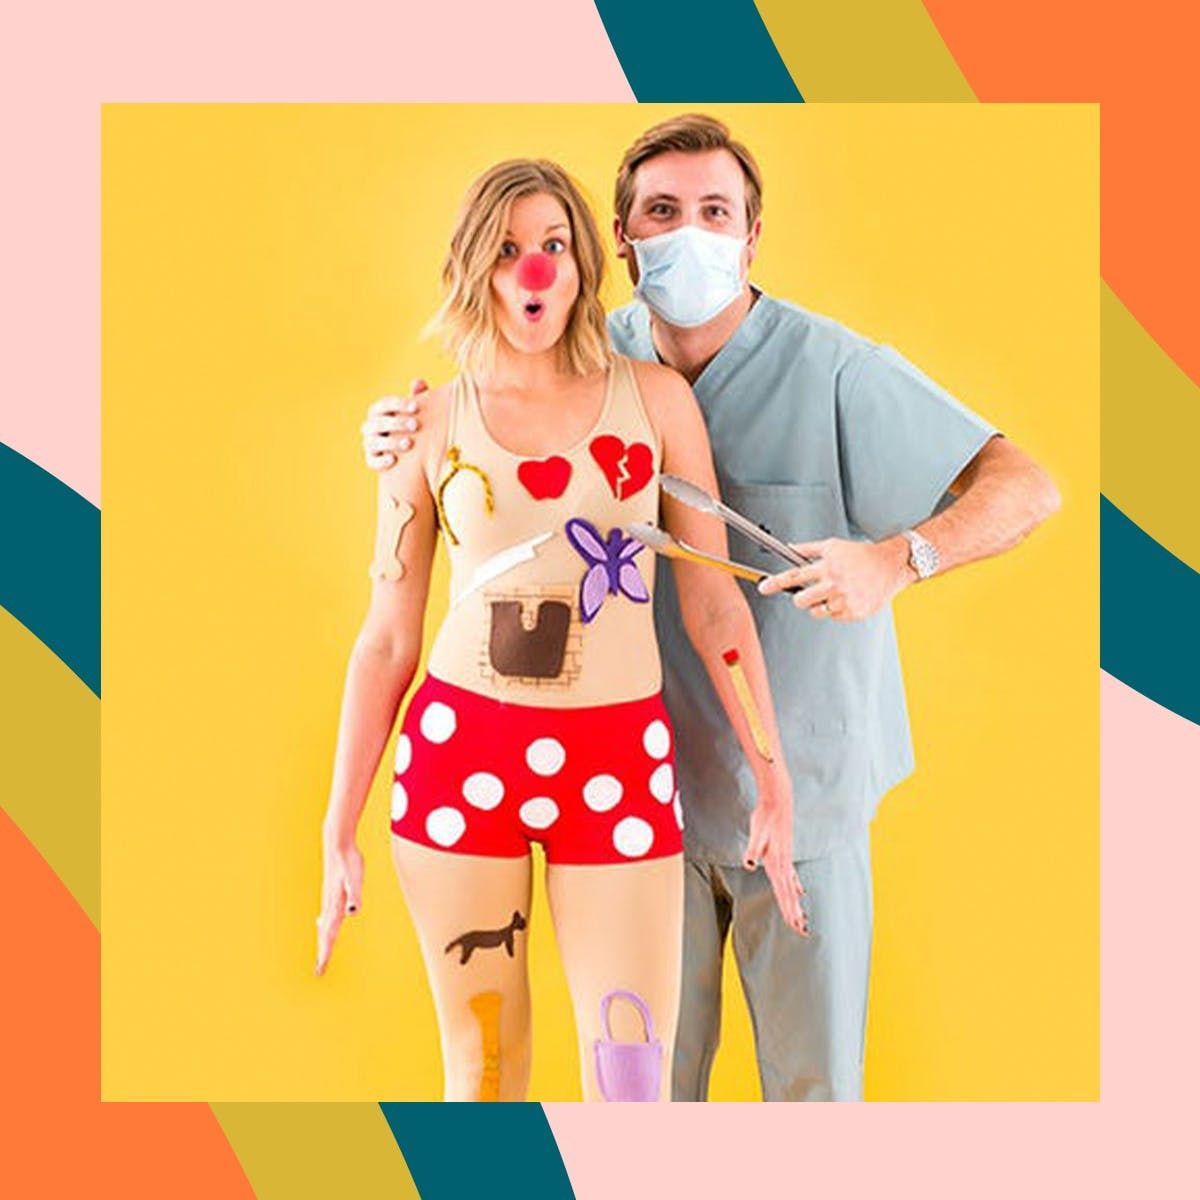 last minute halloween costumes for couples